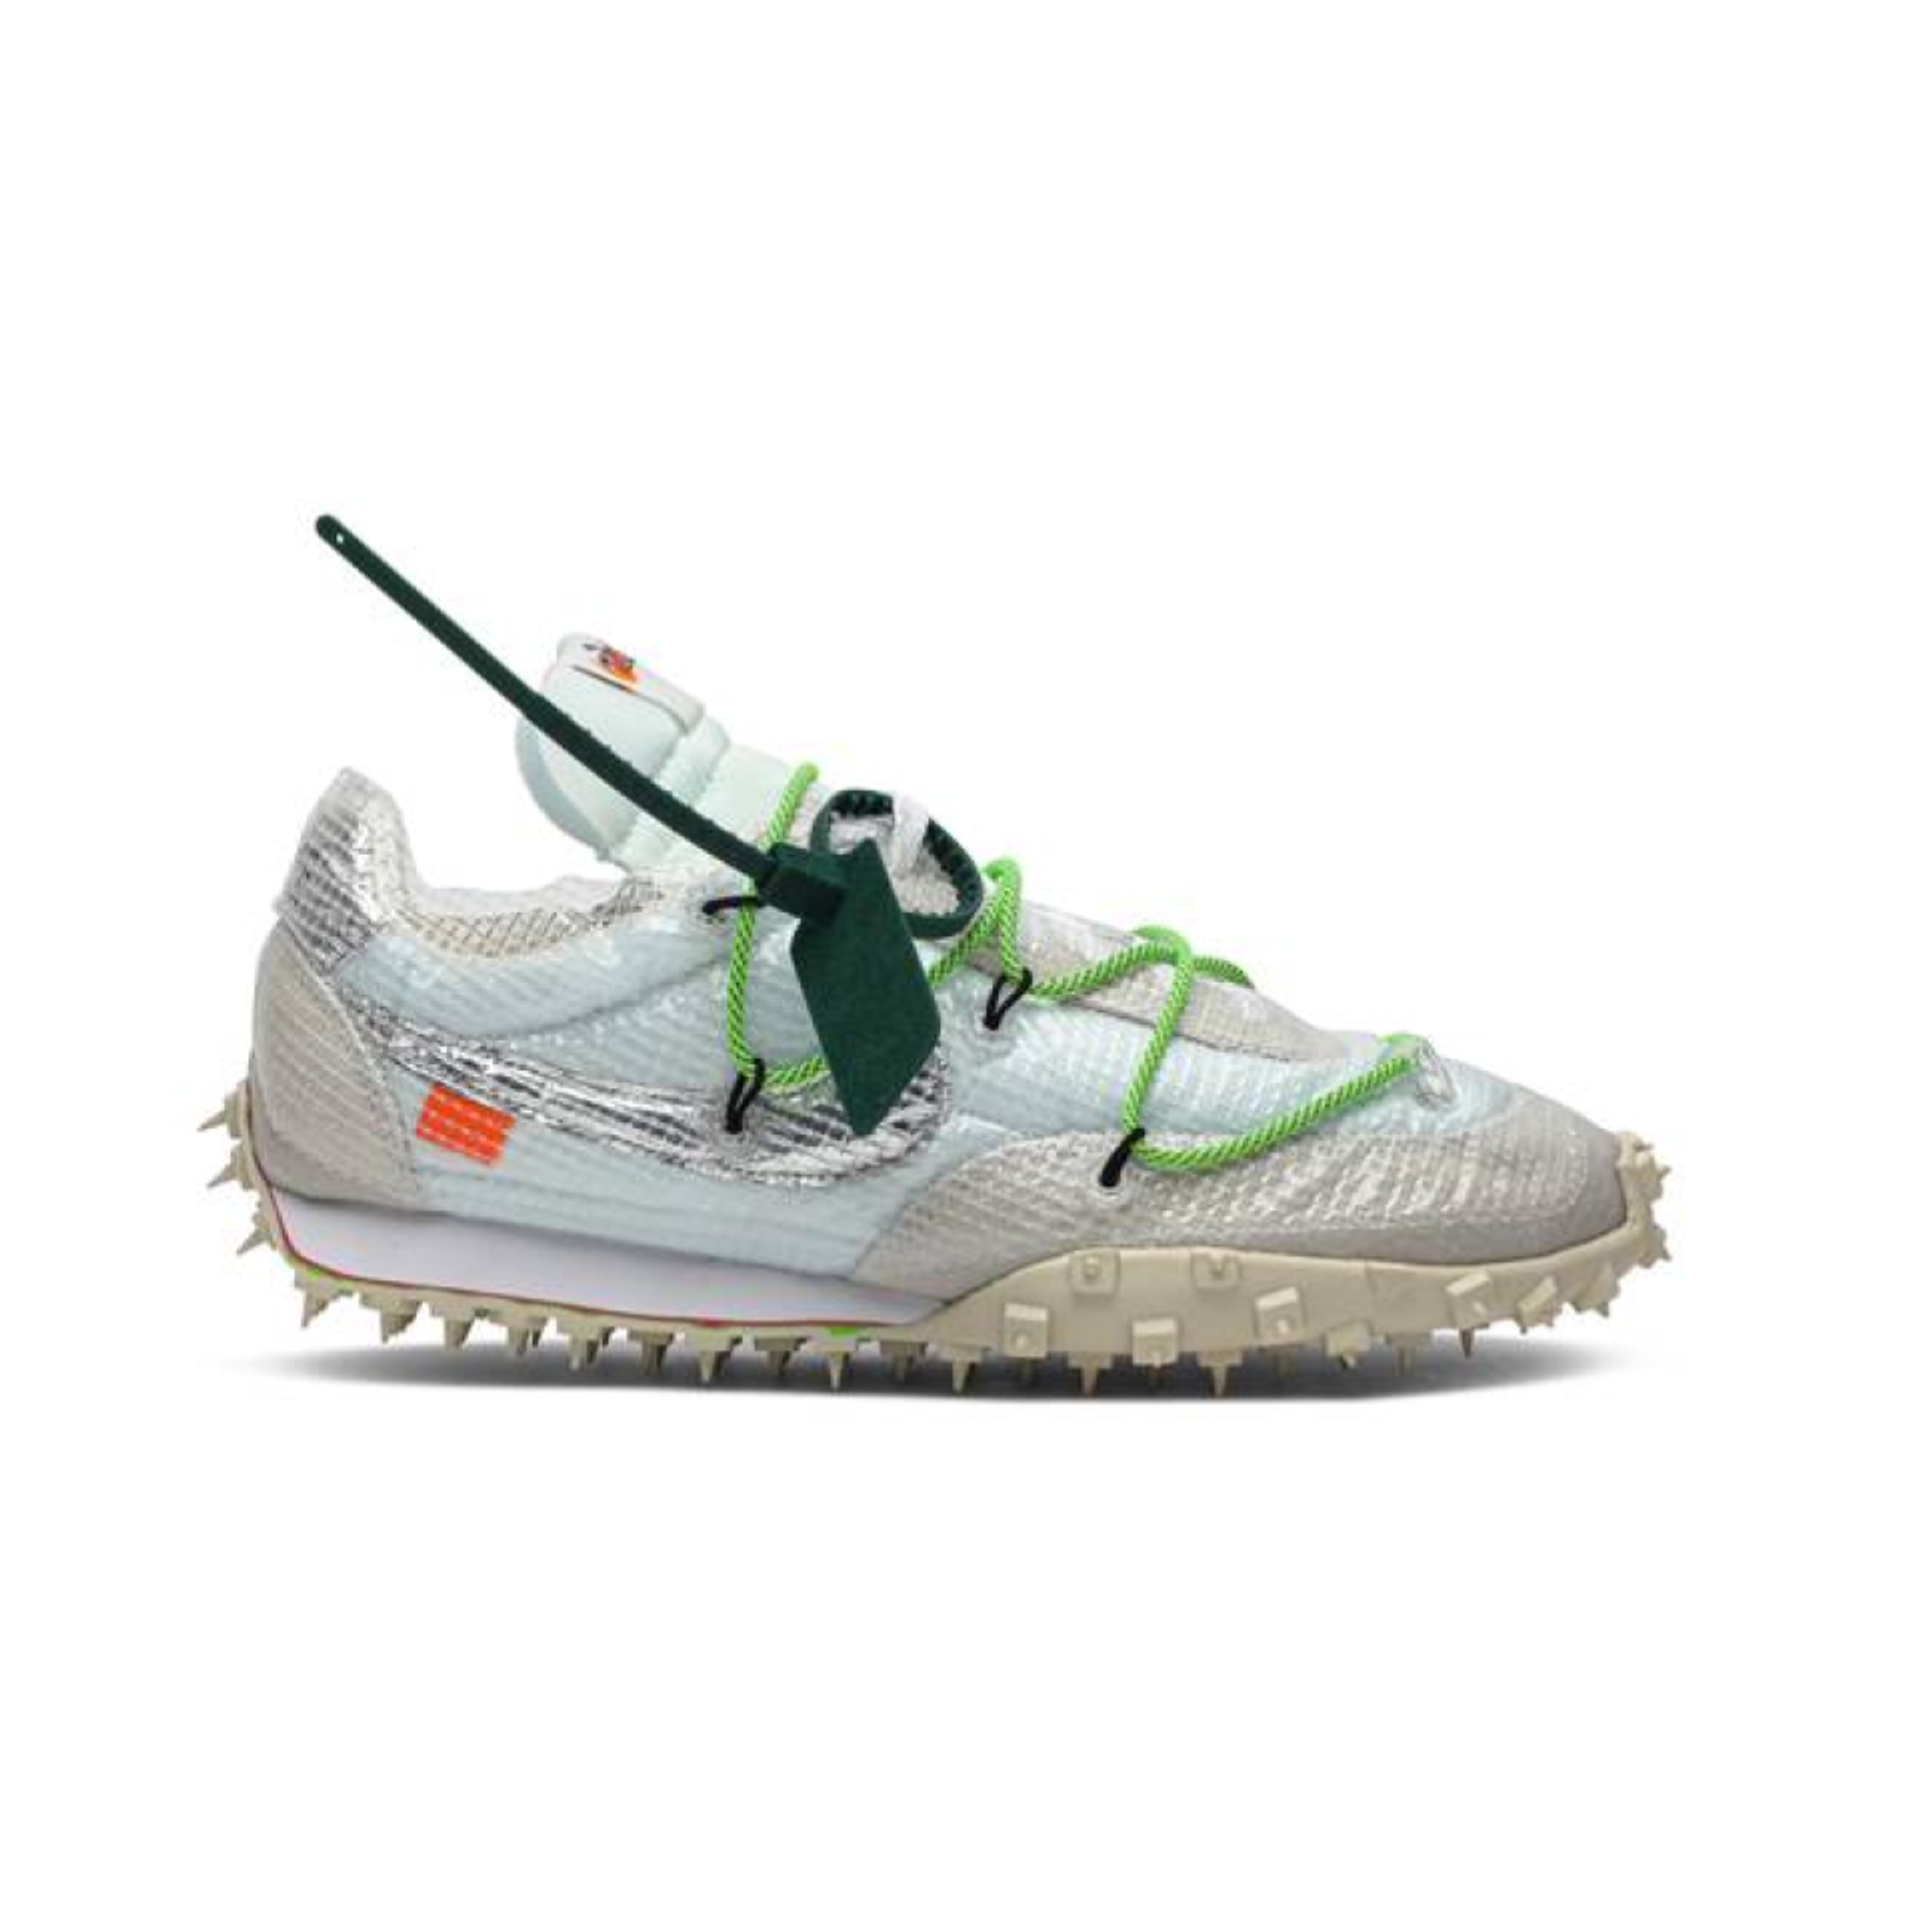 Nike OFF-WHITE x Wmns Waffle Racer 'Electric Green'